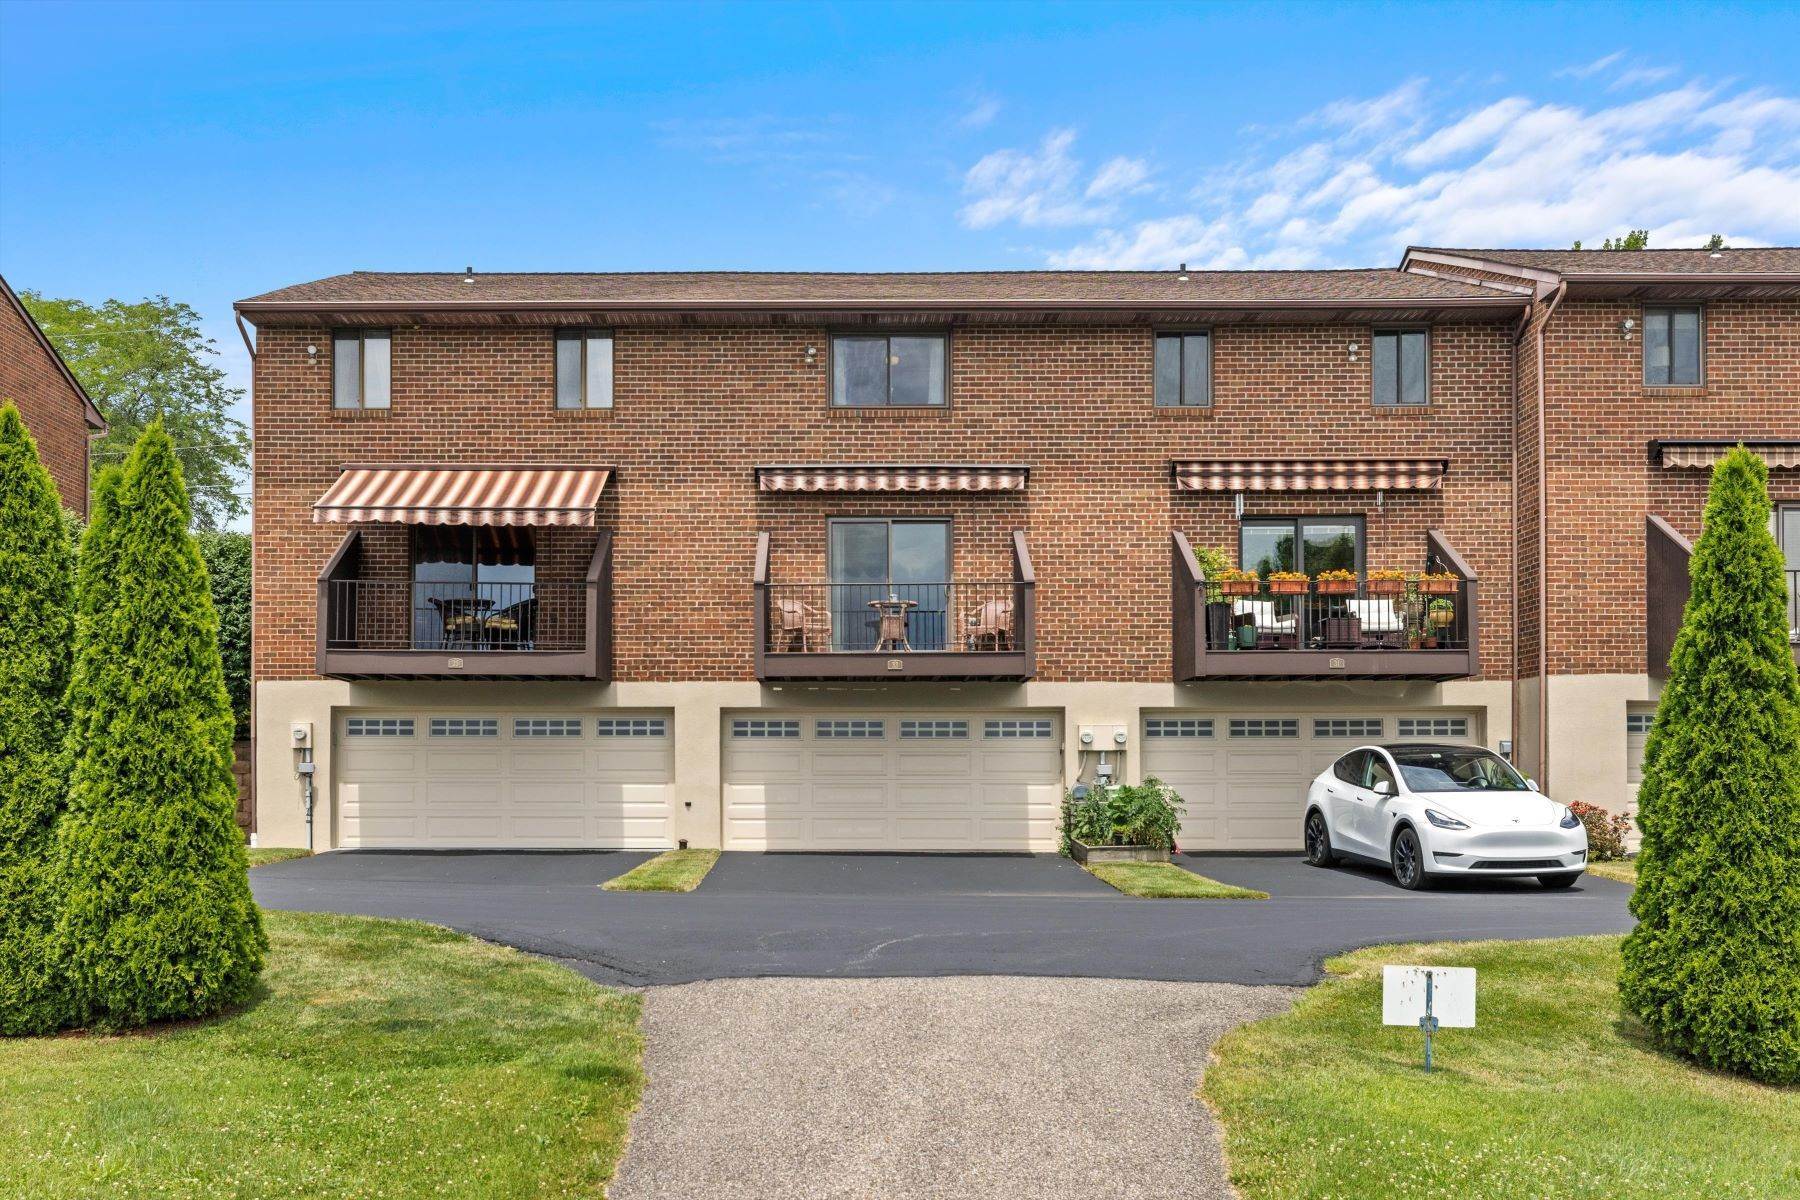 18. Condominiums for Sale at 33 West Washington Avenue, Bethlehem, PA 18018 33 West Washington Avenue Bethlehem, Pennsylvania 18018 United States